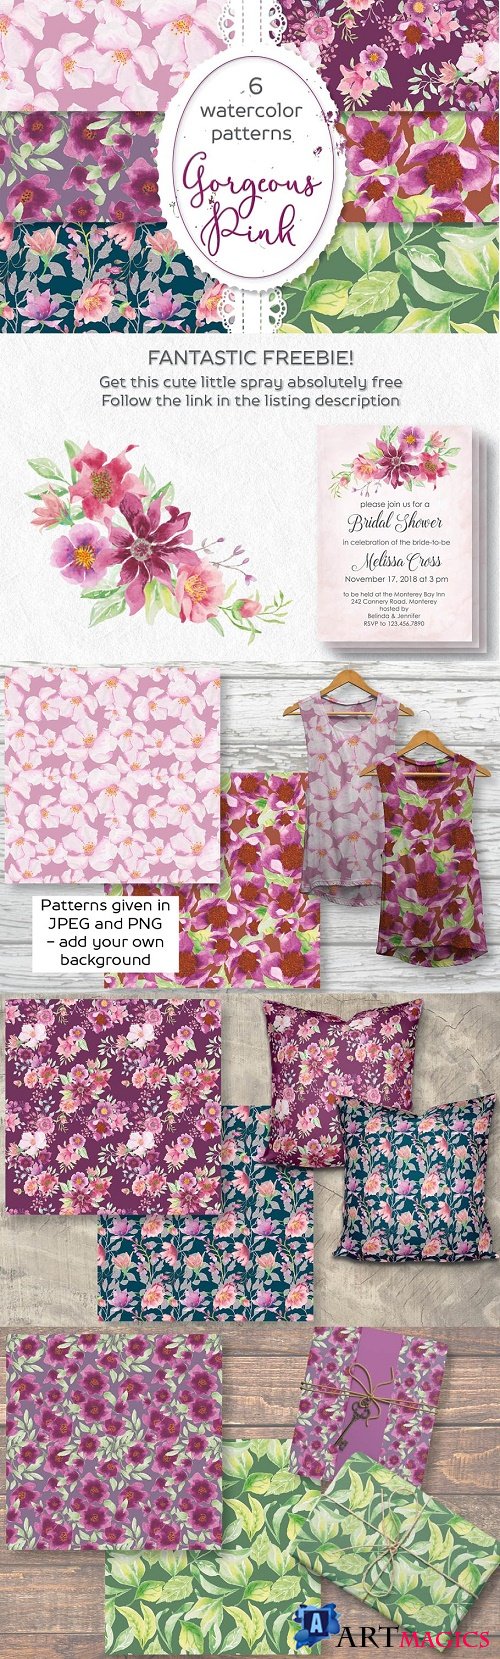 Six pink floral watercolor patterns - 2624167